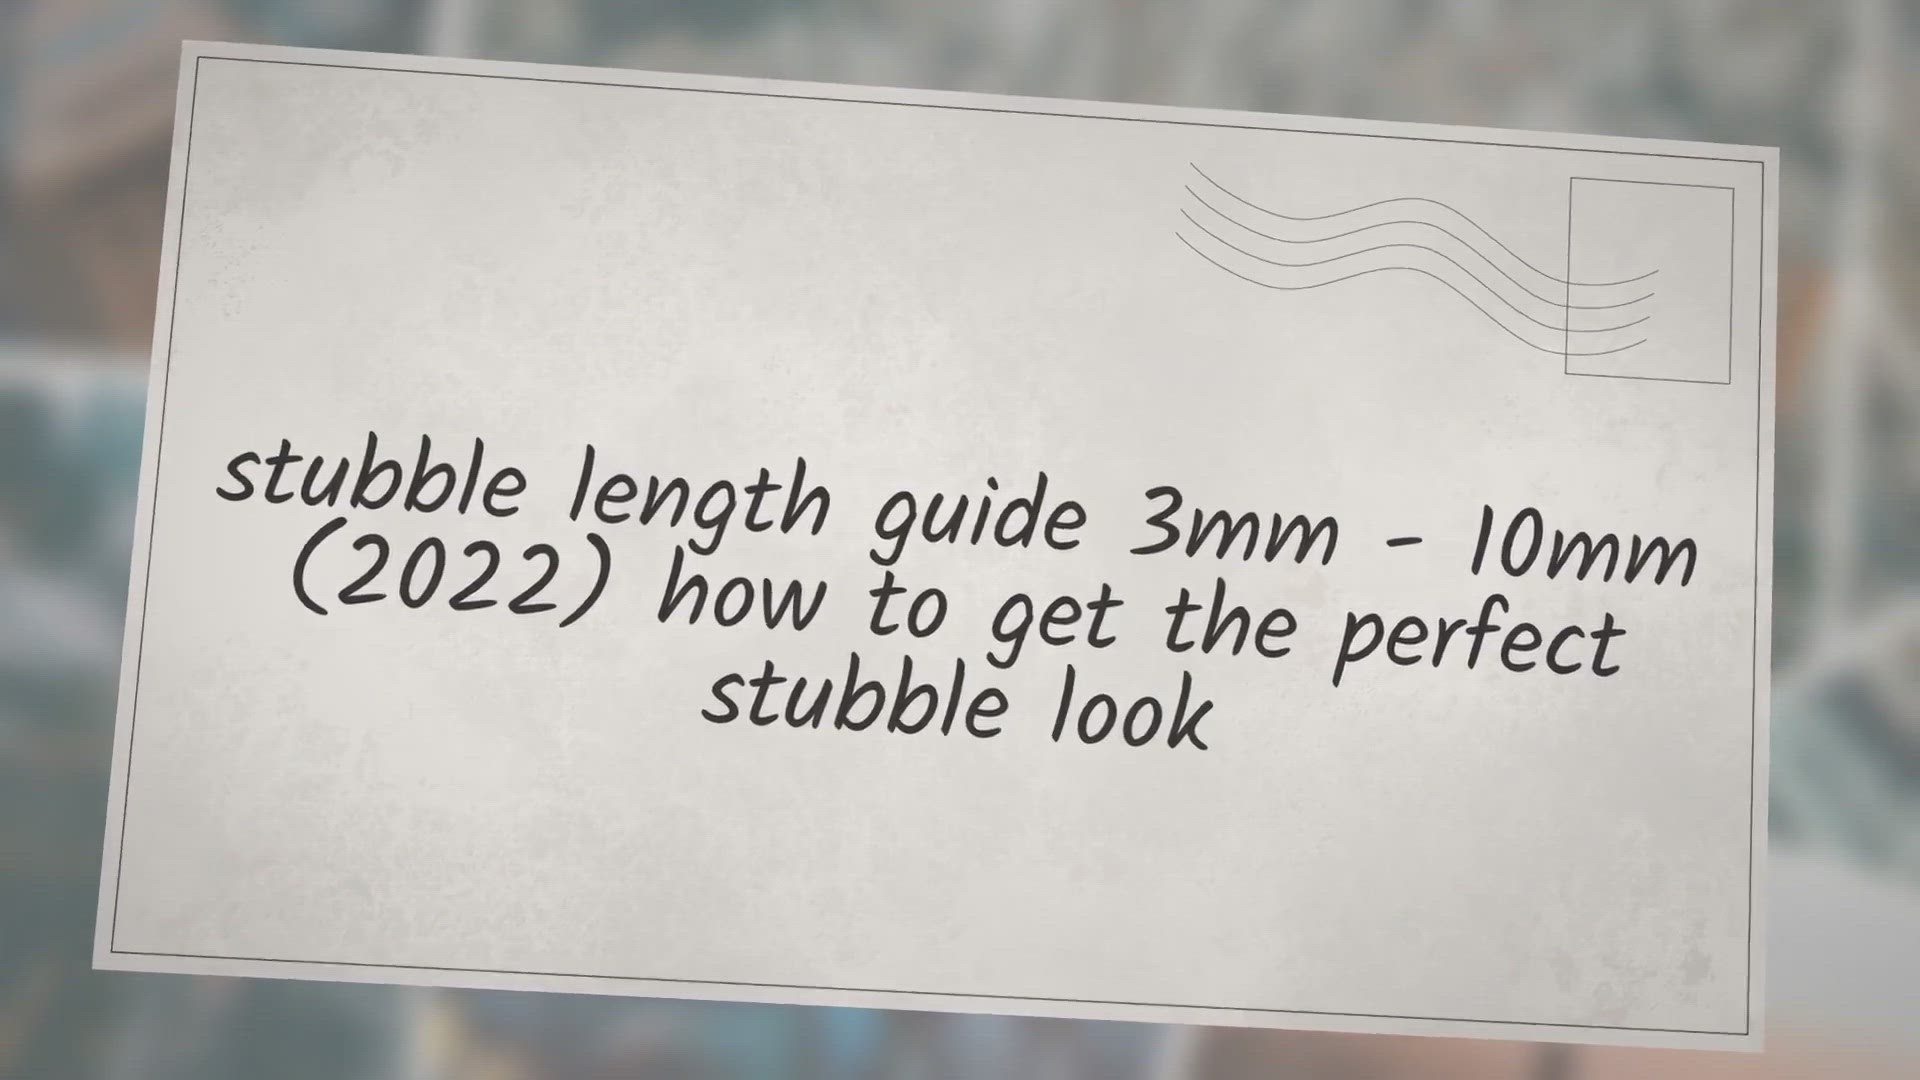 'Video thumbnail for stubble length guide 3mm - 10mm (2022) how to get the perfect stubble look'